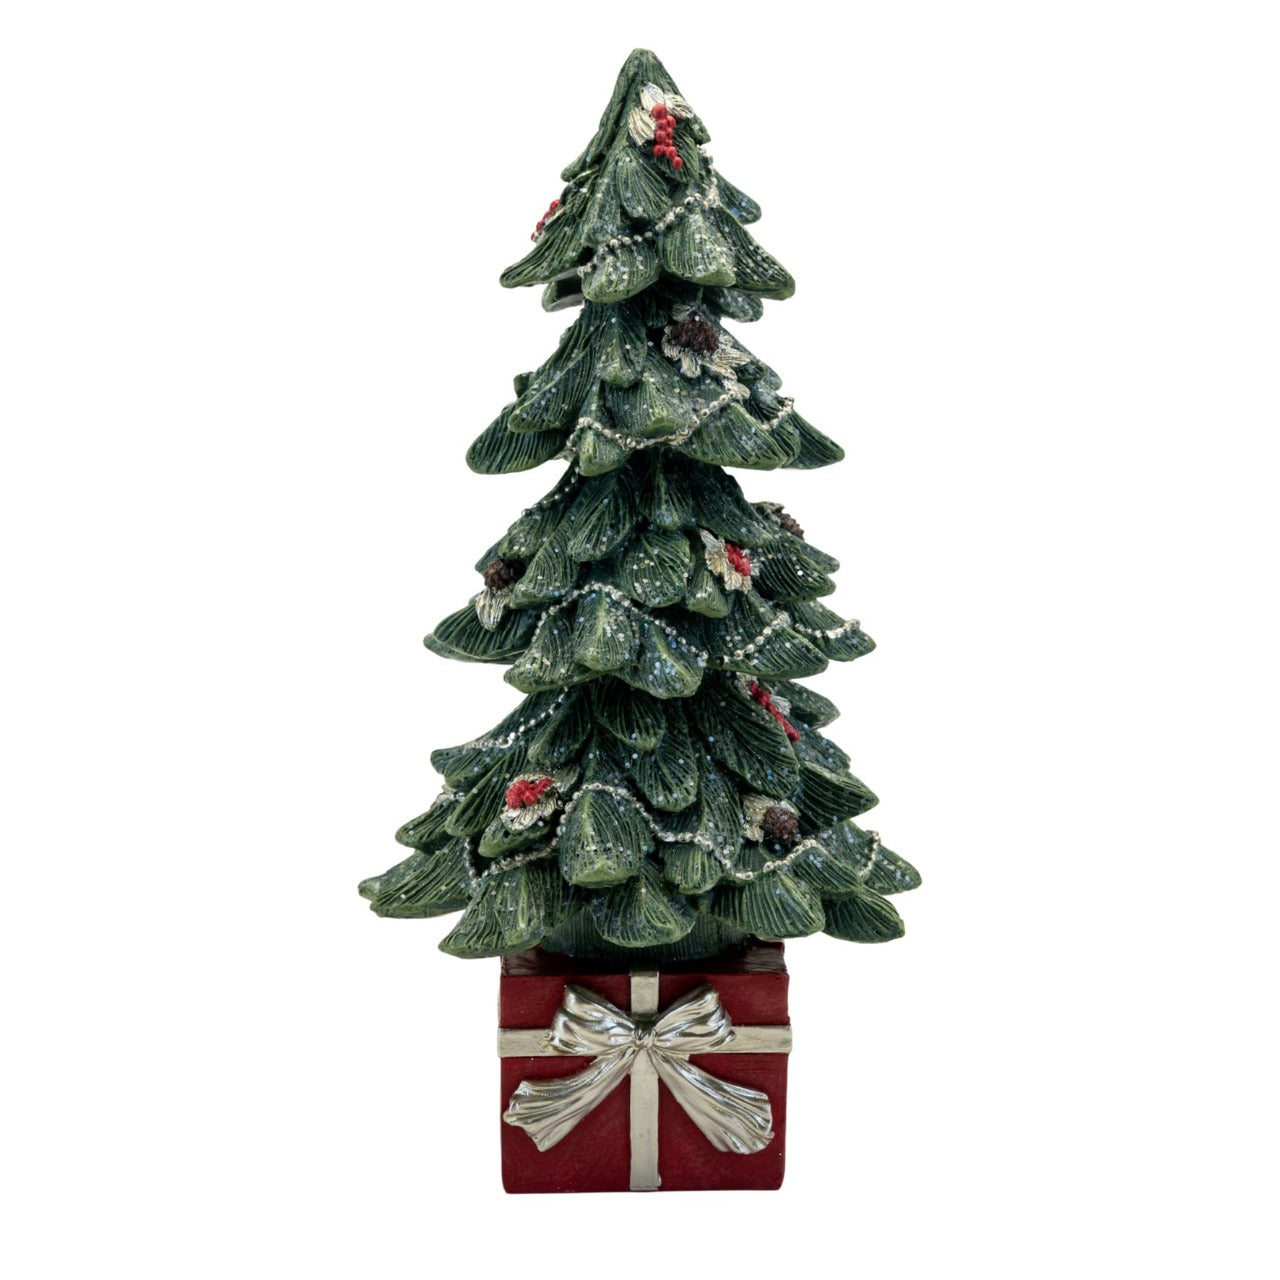 Freestanding Christmas Tree Ornament 26.5cm  A relaxing, cosy Christmas has never been so simple to achieve. Step away from the hustle and bustle and delve into a blissful, traditional Christmas with Holiday Cottage.